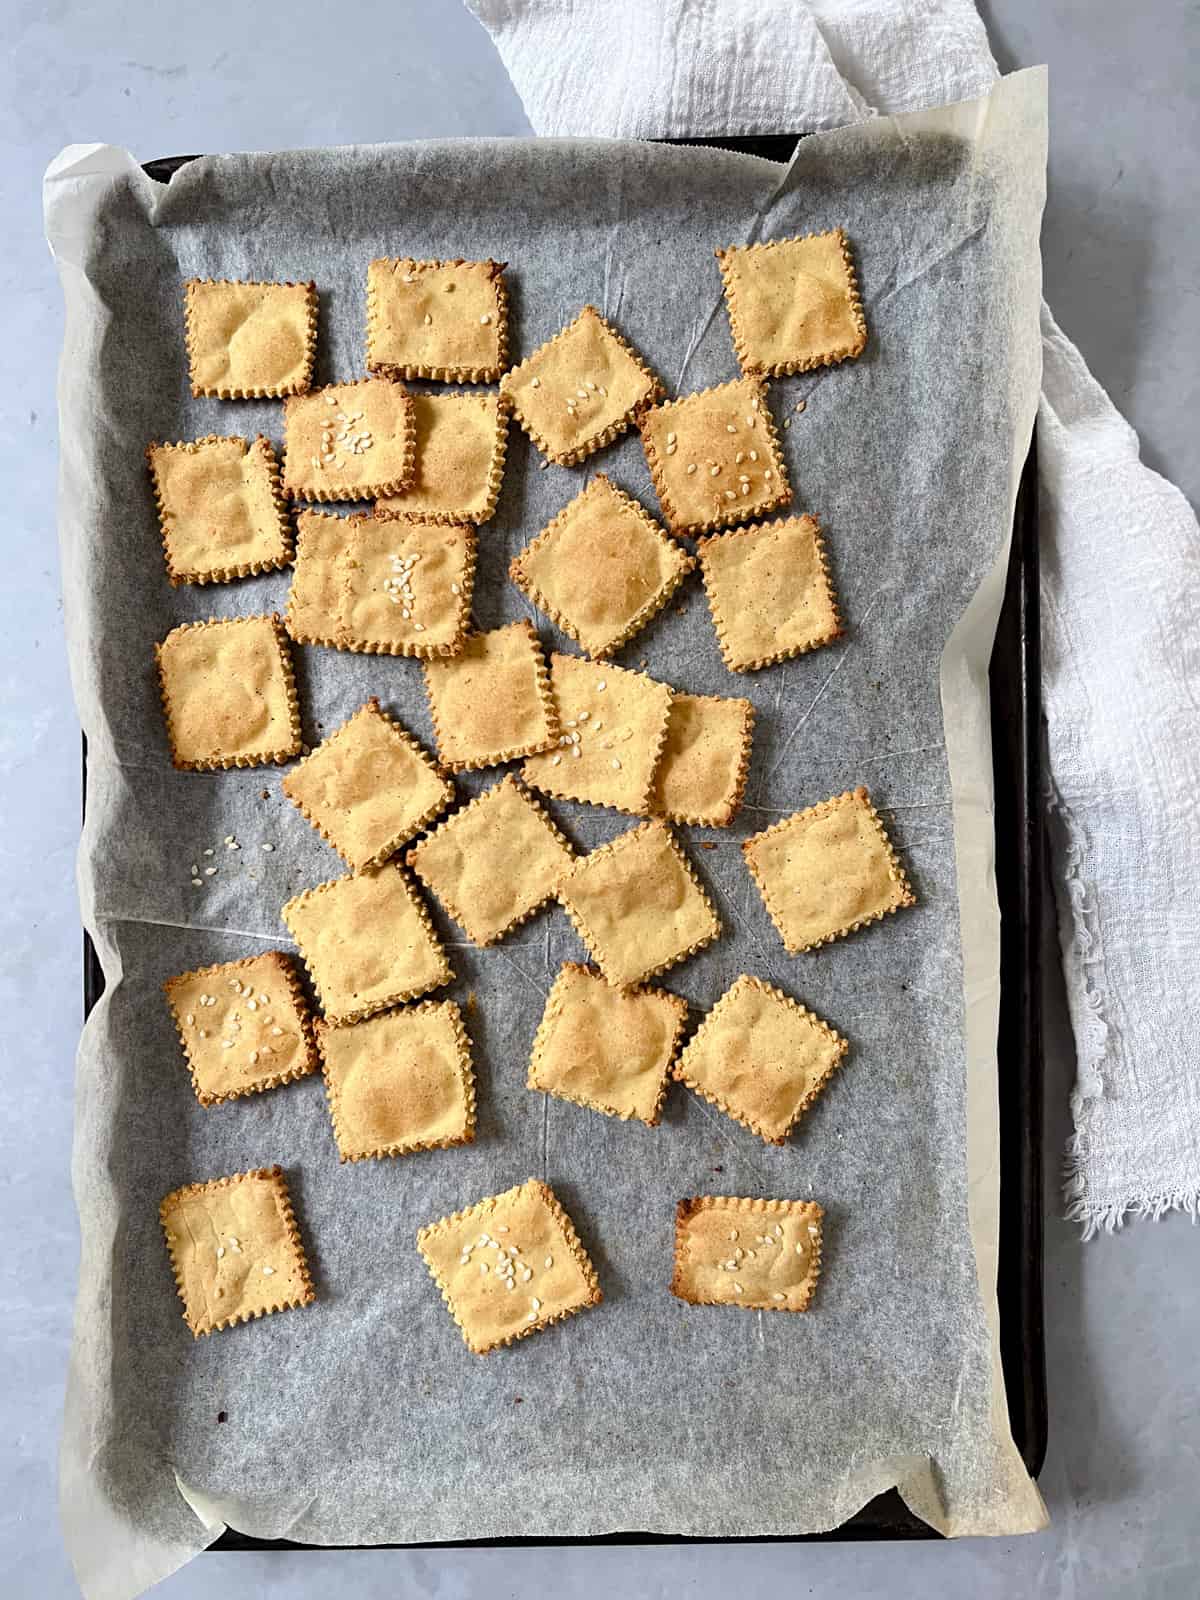 chickpea crackers in a baking sheet pan